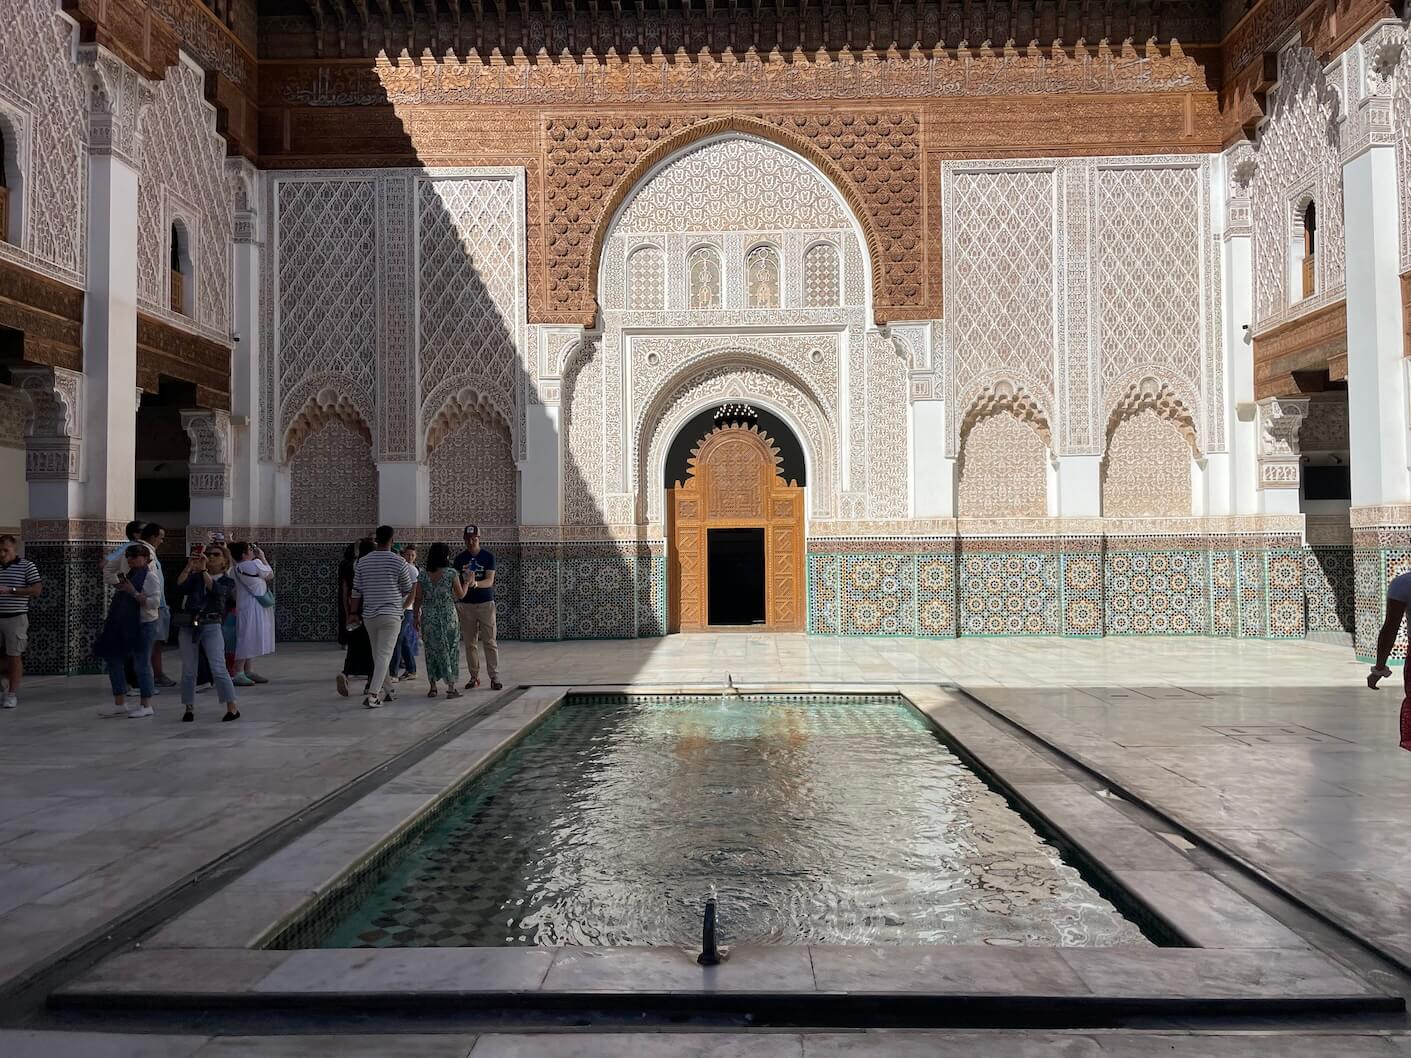 The central courtyard of Ben Yousseff Medersa, the historic Islamic school located in the heart of Marrakech